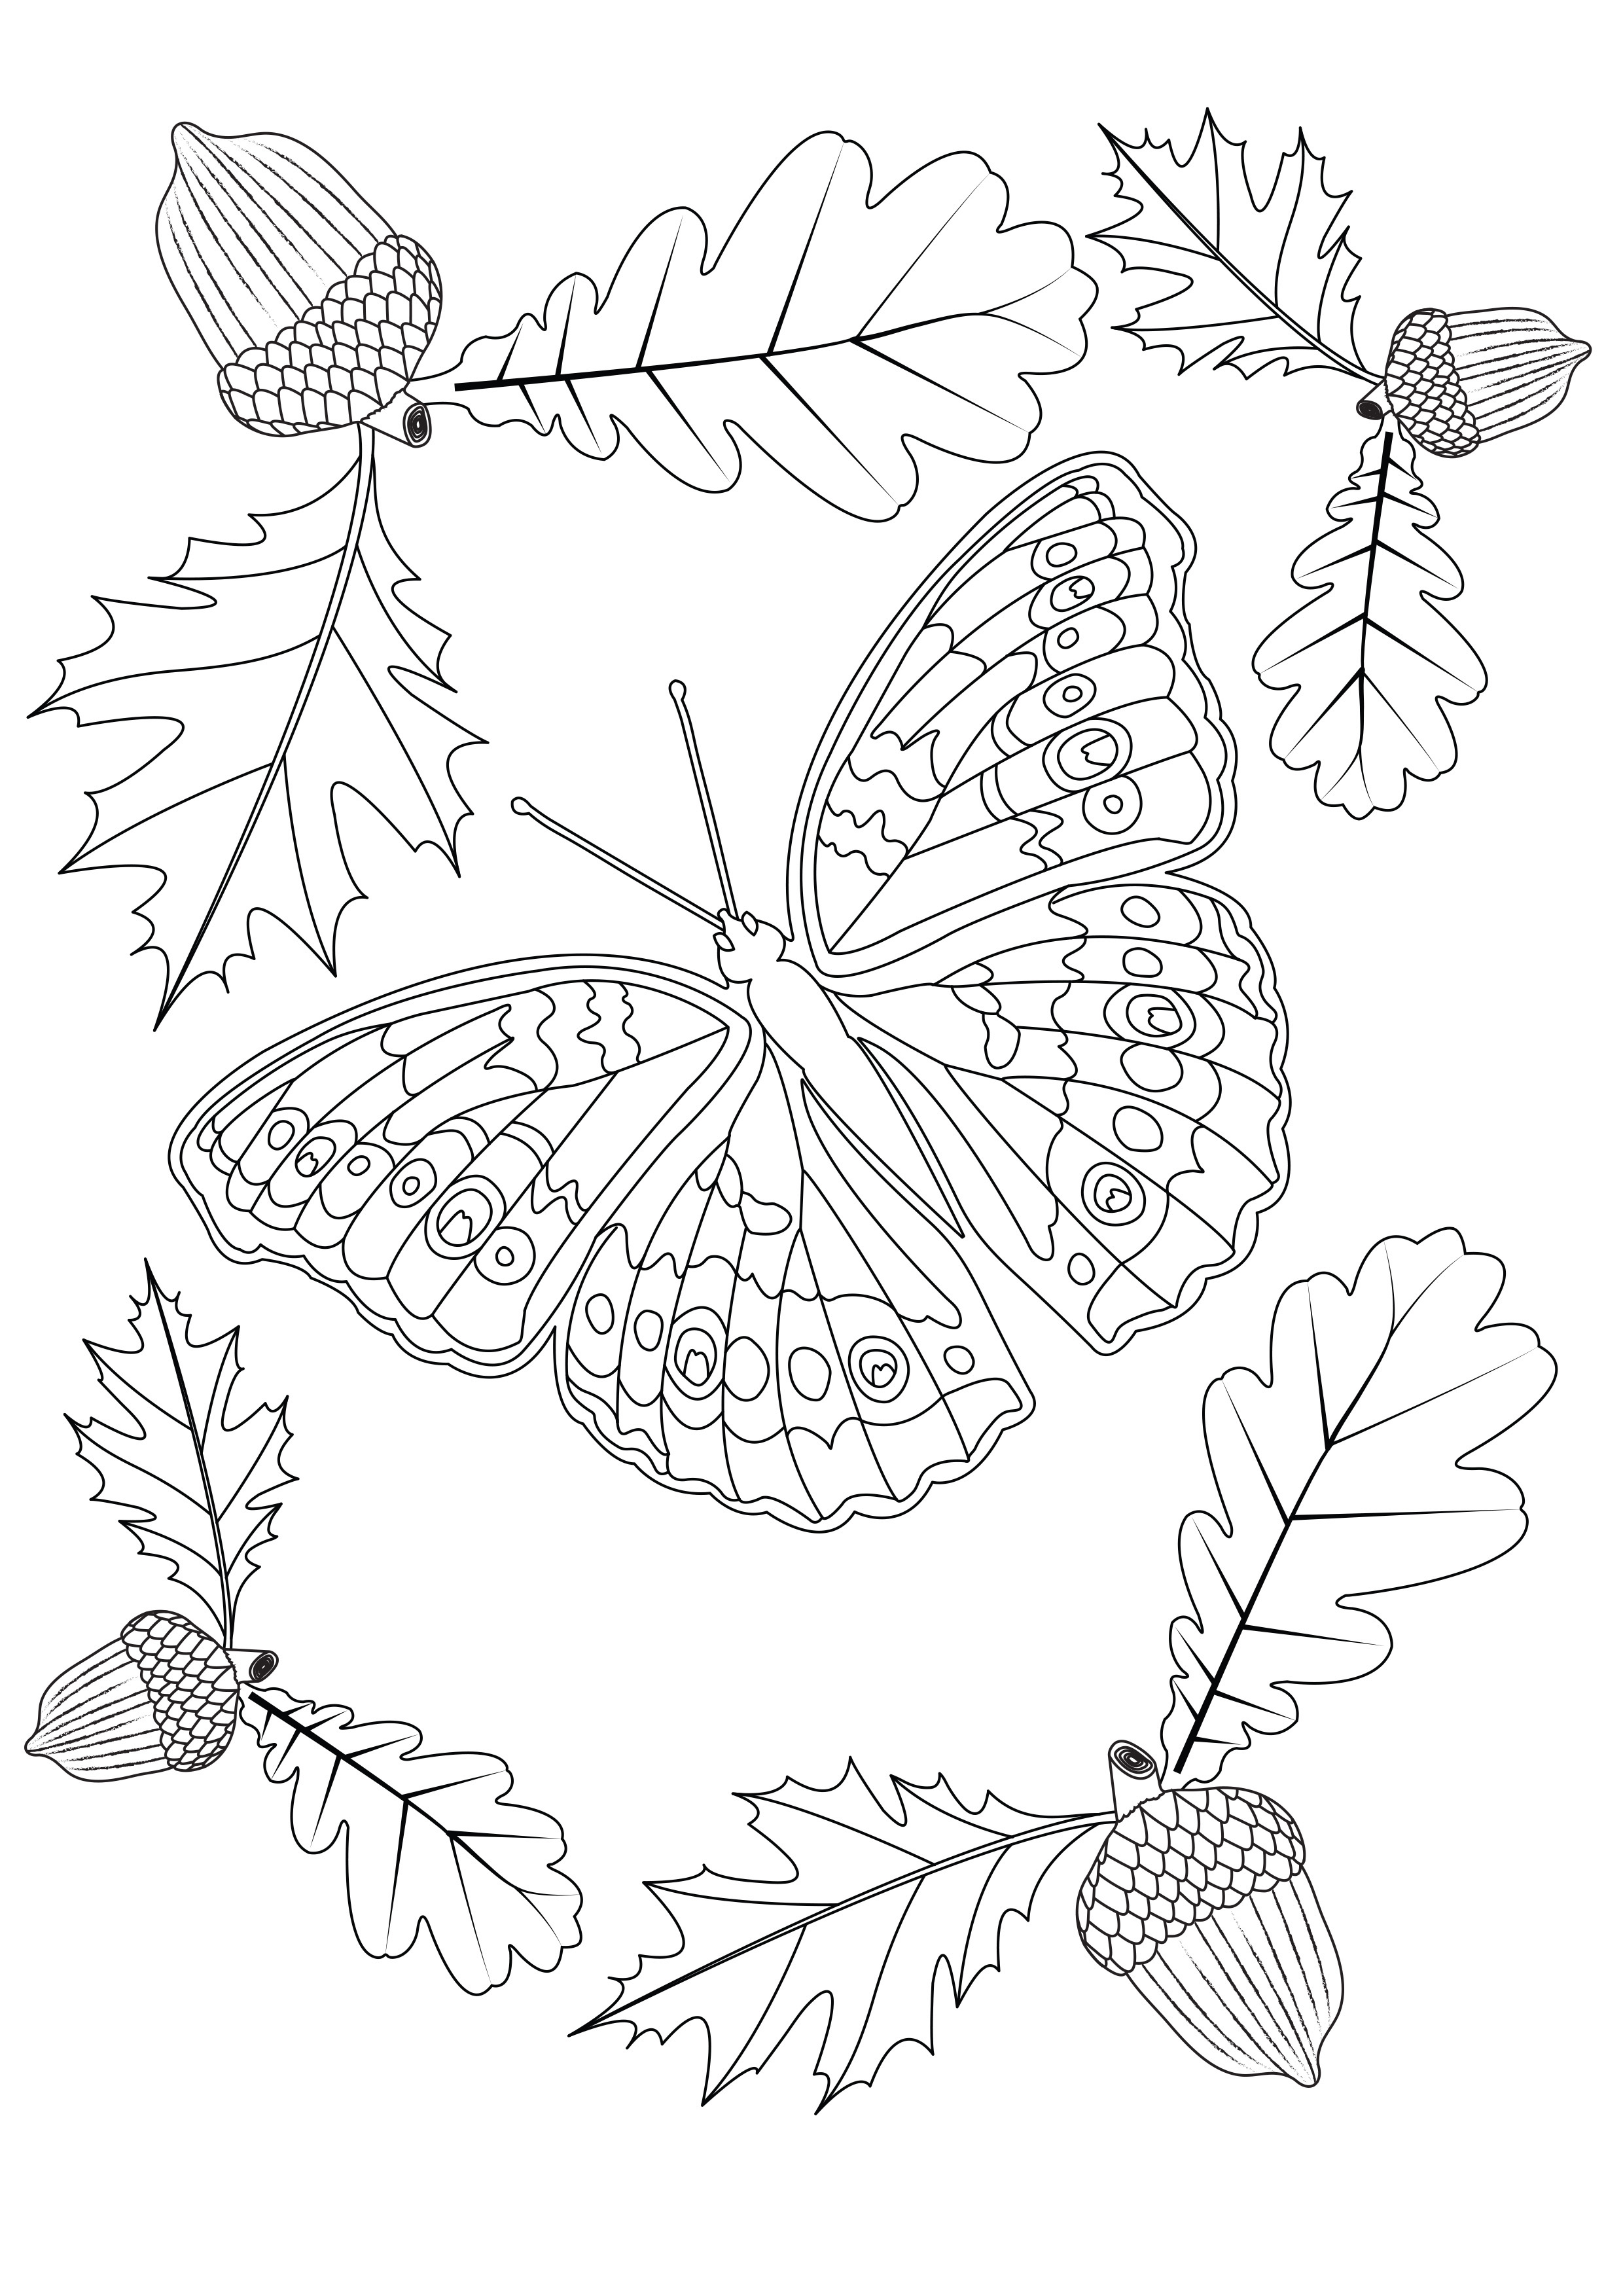 Autumn Butterfly, from the coloring book 'Butterfly garden', by Emma L Williams